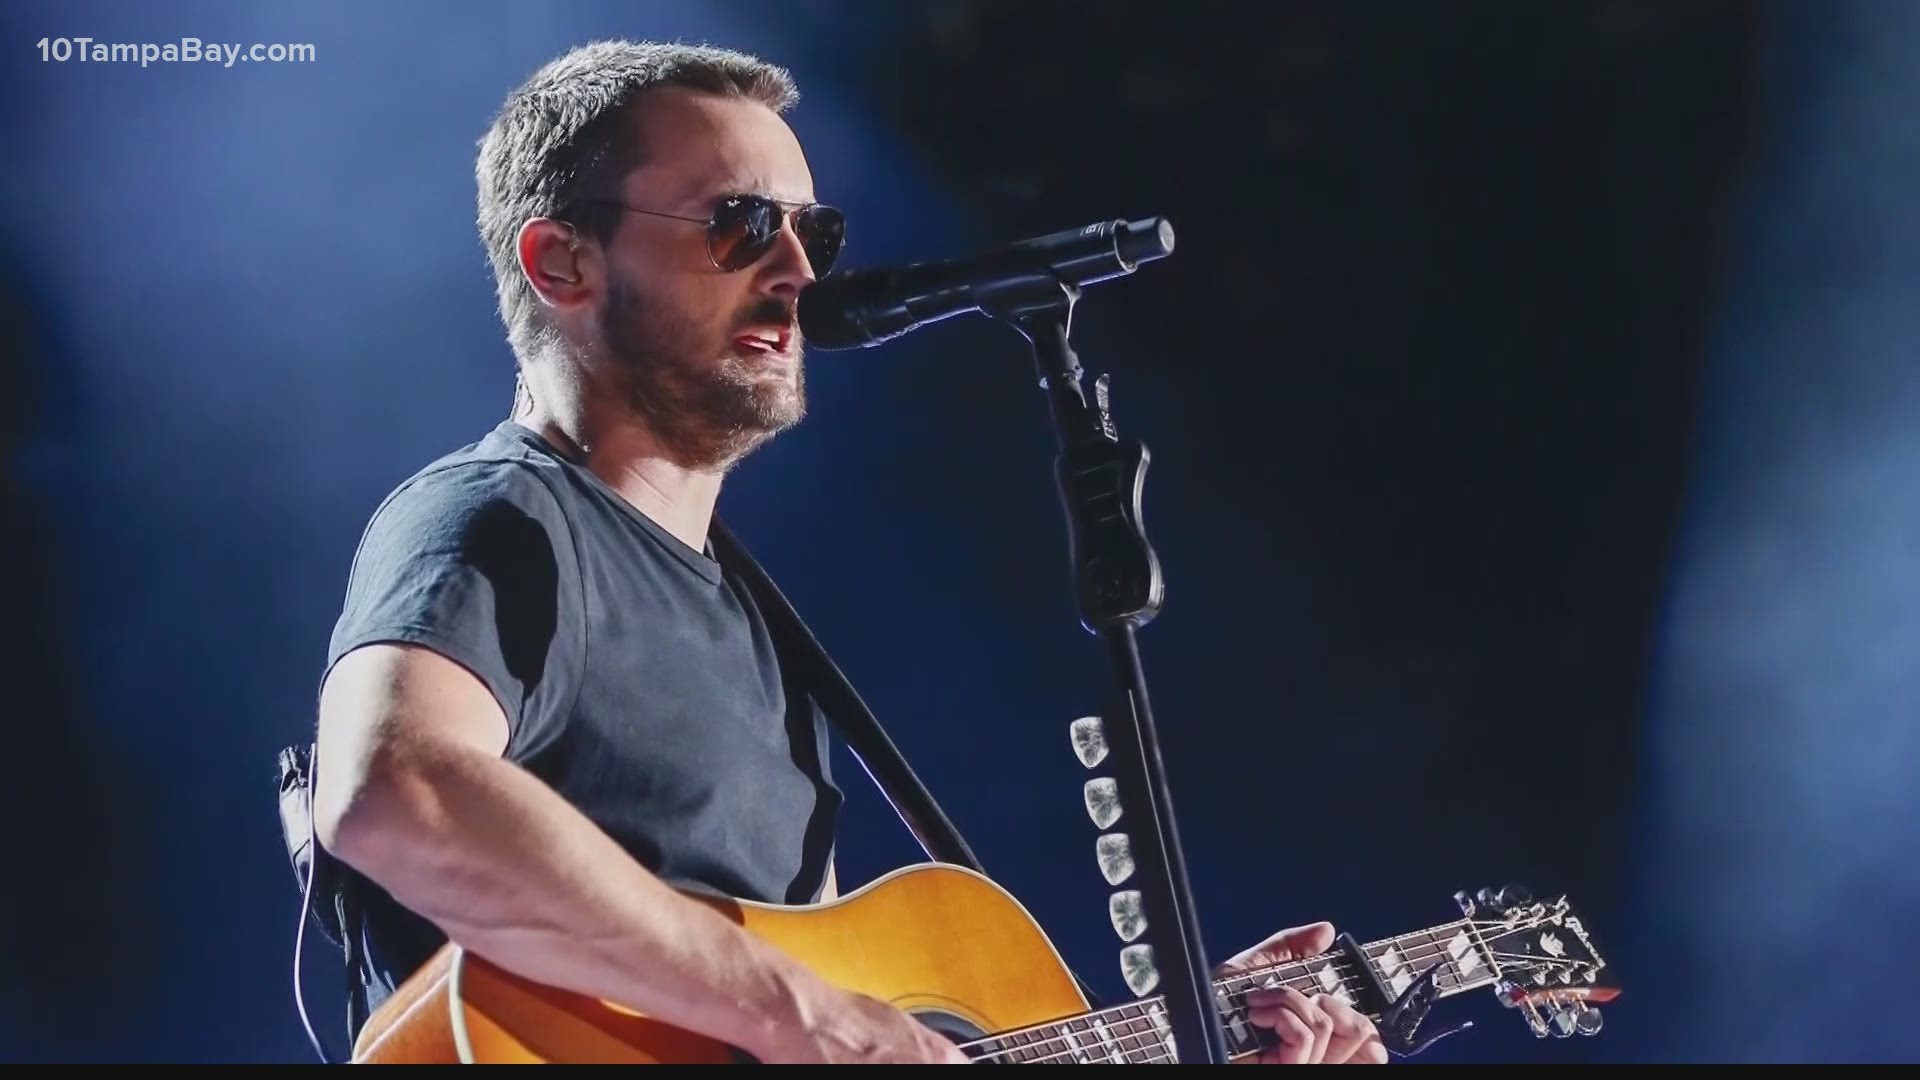 Country singer Eric Church is ready to get back to playing live music and is bringing his "Gather Again Tour" right here to the Tampa Bay area.